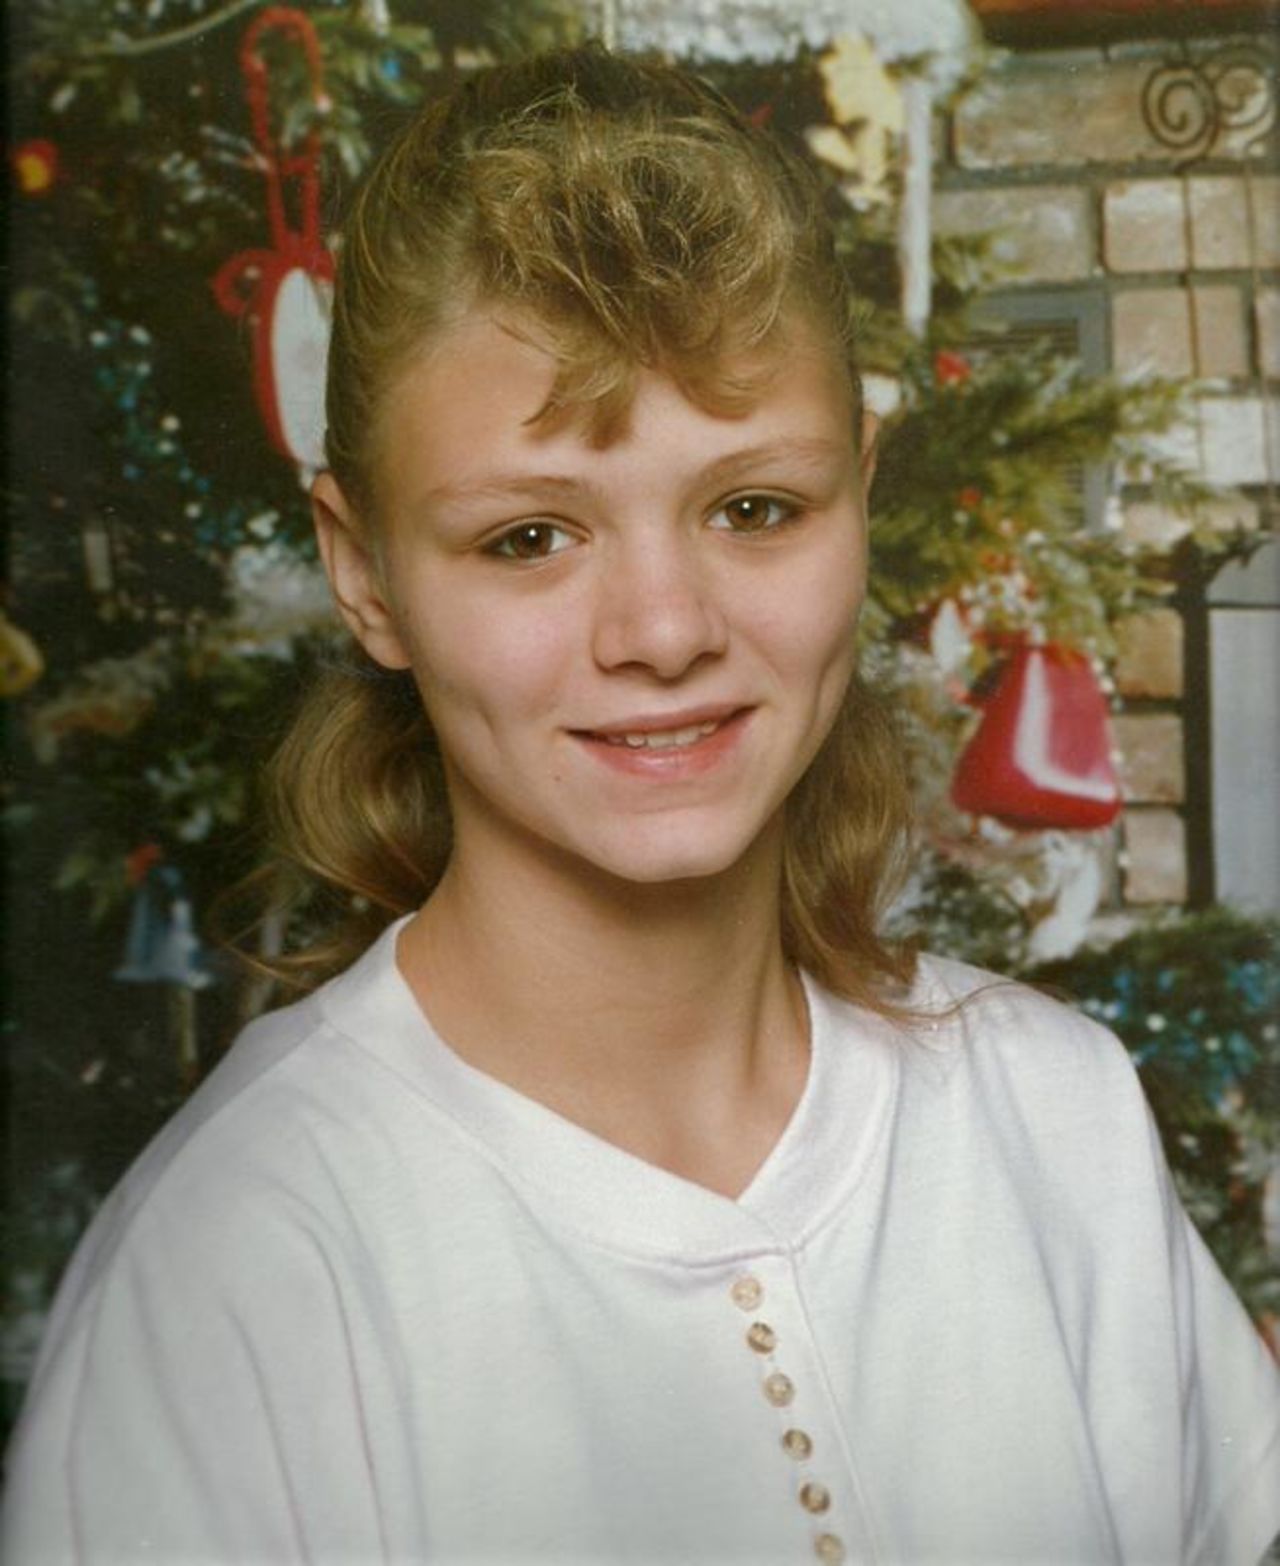 Christina Adkins was last seen in Cleveland in January 1995.  She was 18 years old and five months pregnant when she disappeared.